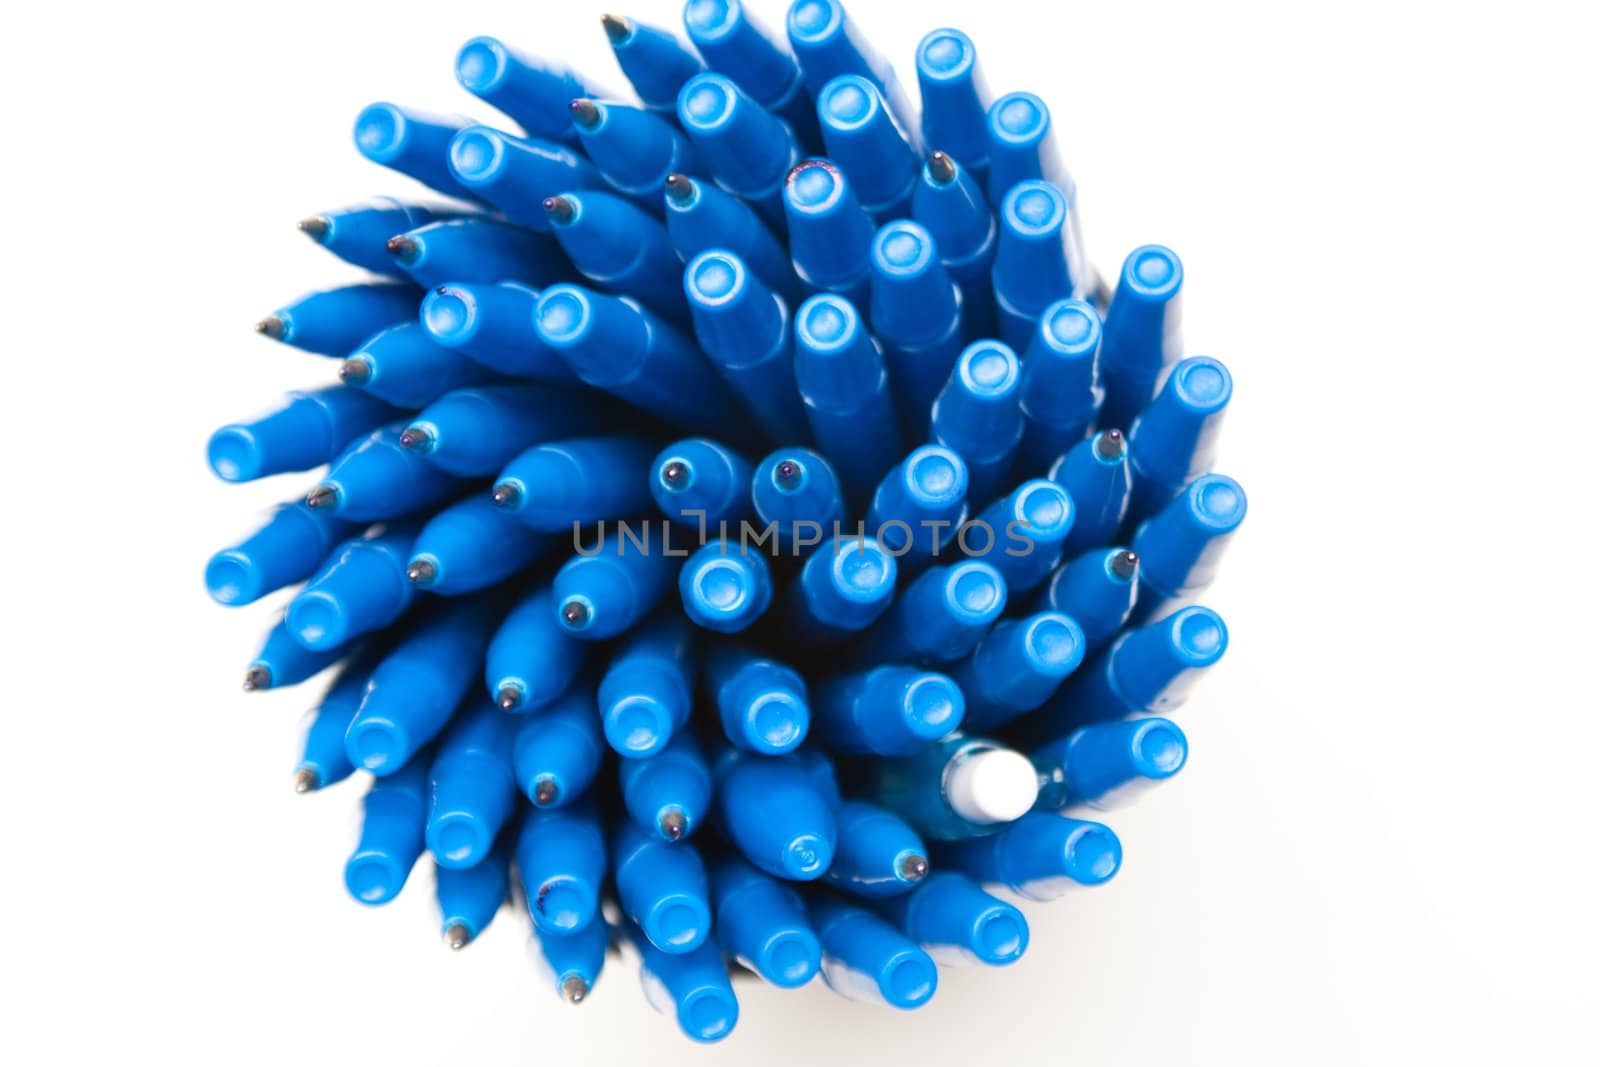 These blue pen. But there came a white one.